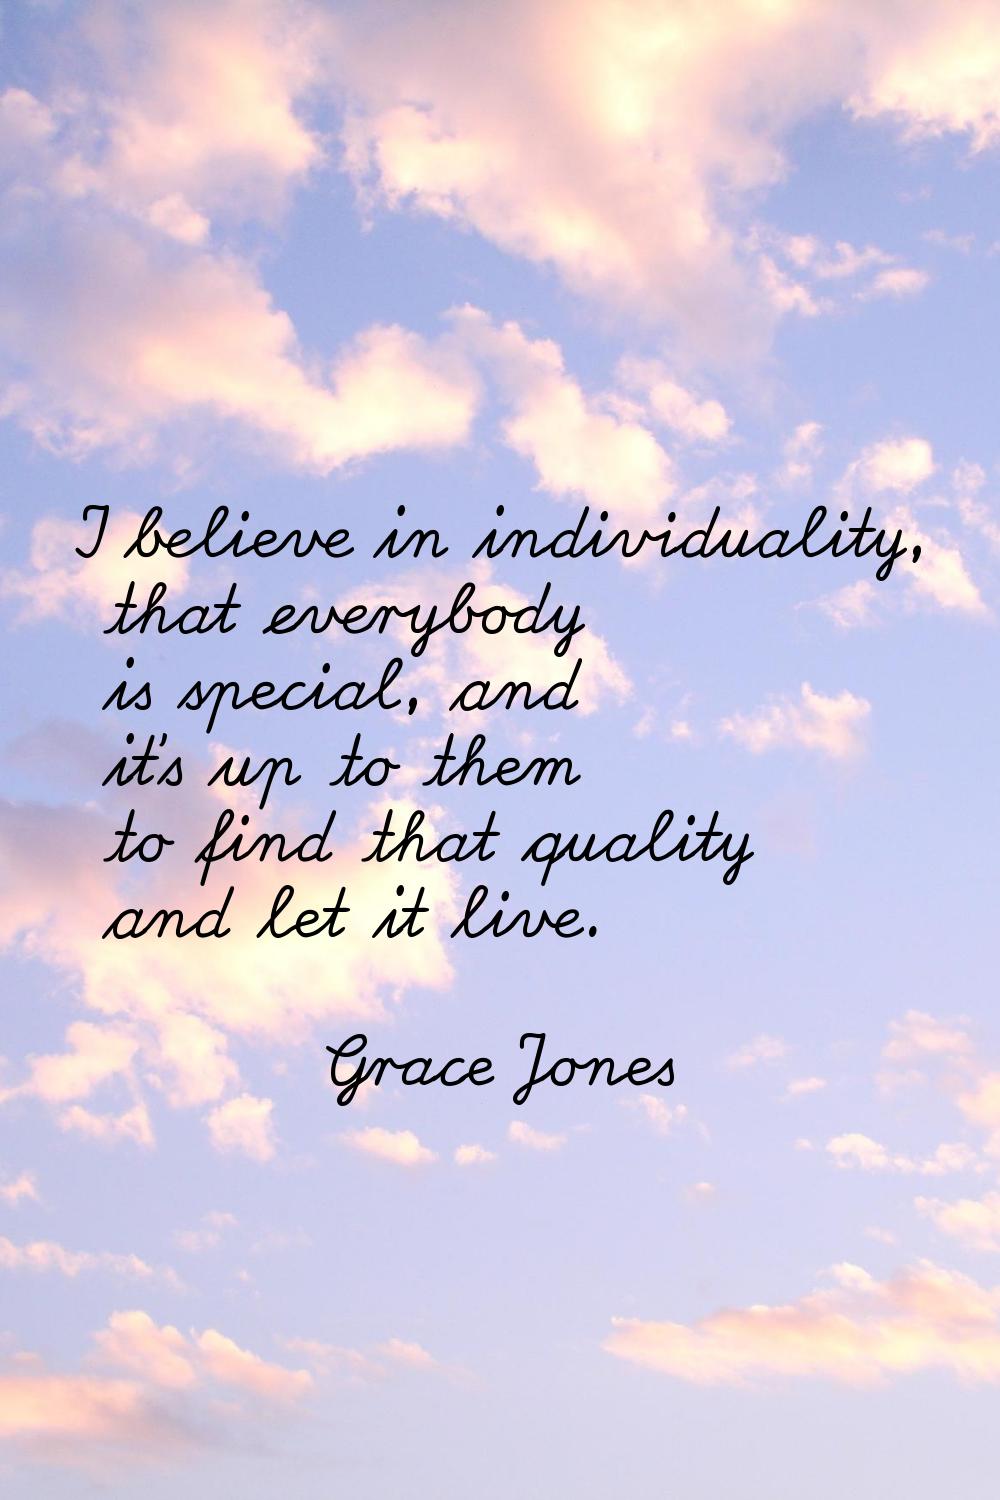 I believe in individuality, that everybody is special, and it's up to them to find that quality and